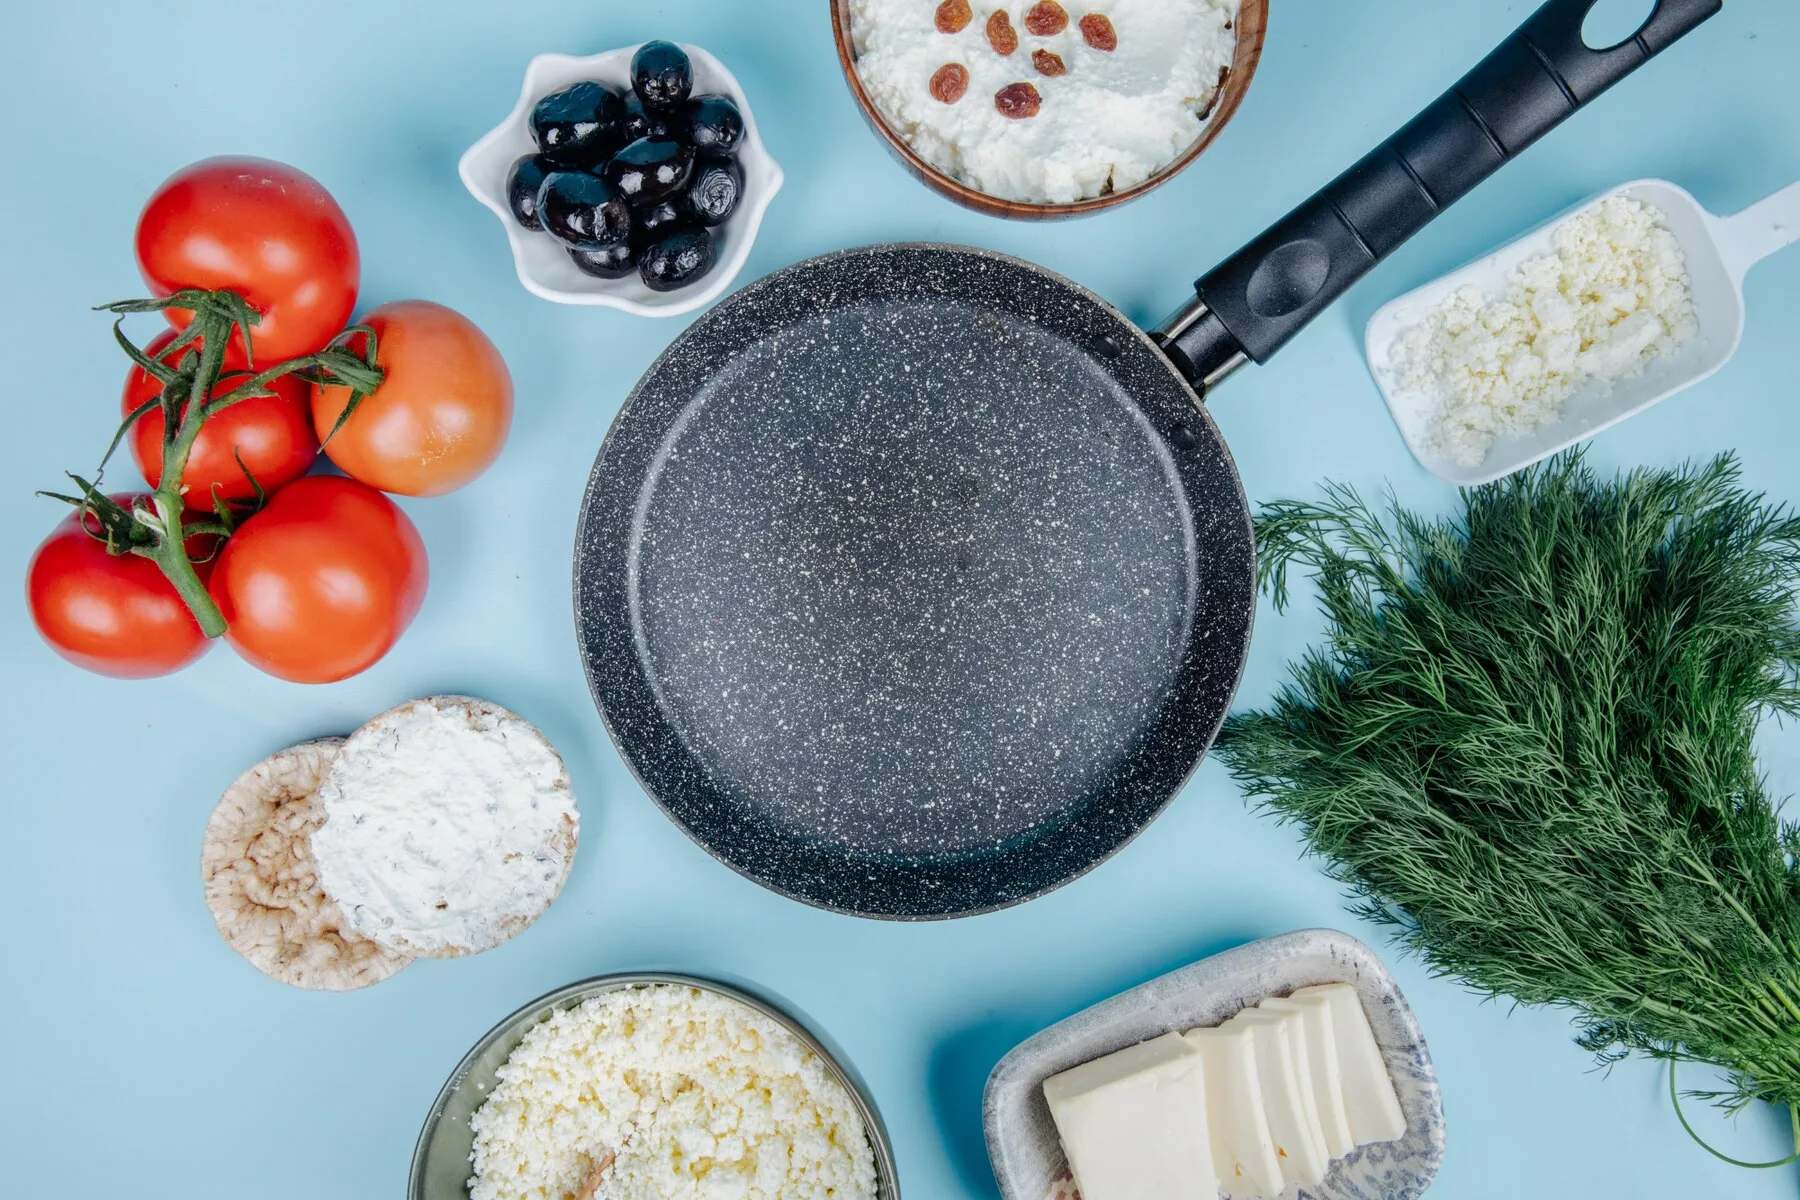 7 Great Granite Cooking Pans in 2023 for an Eco-Friendly Kitchen